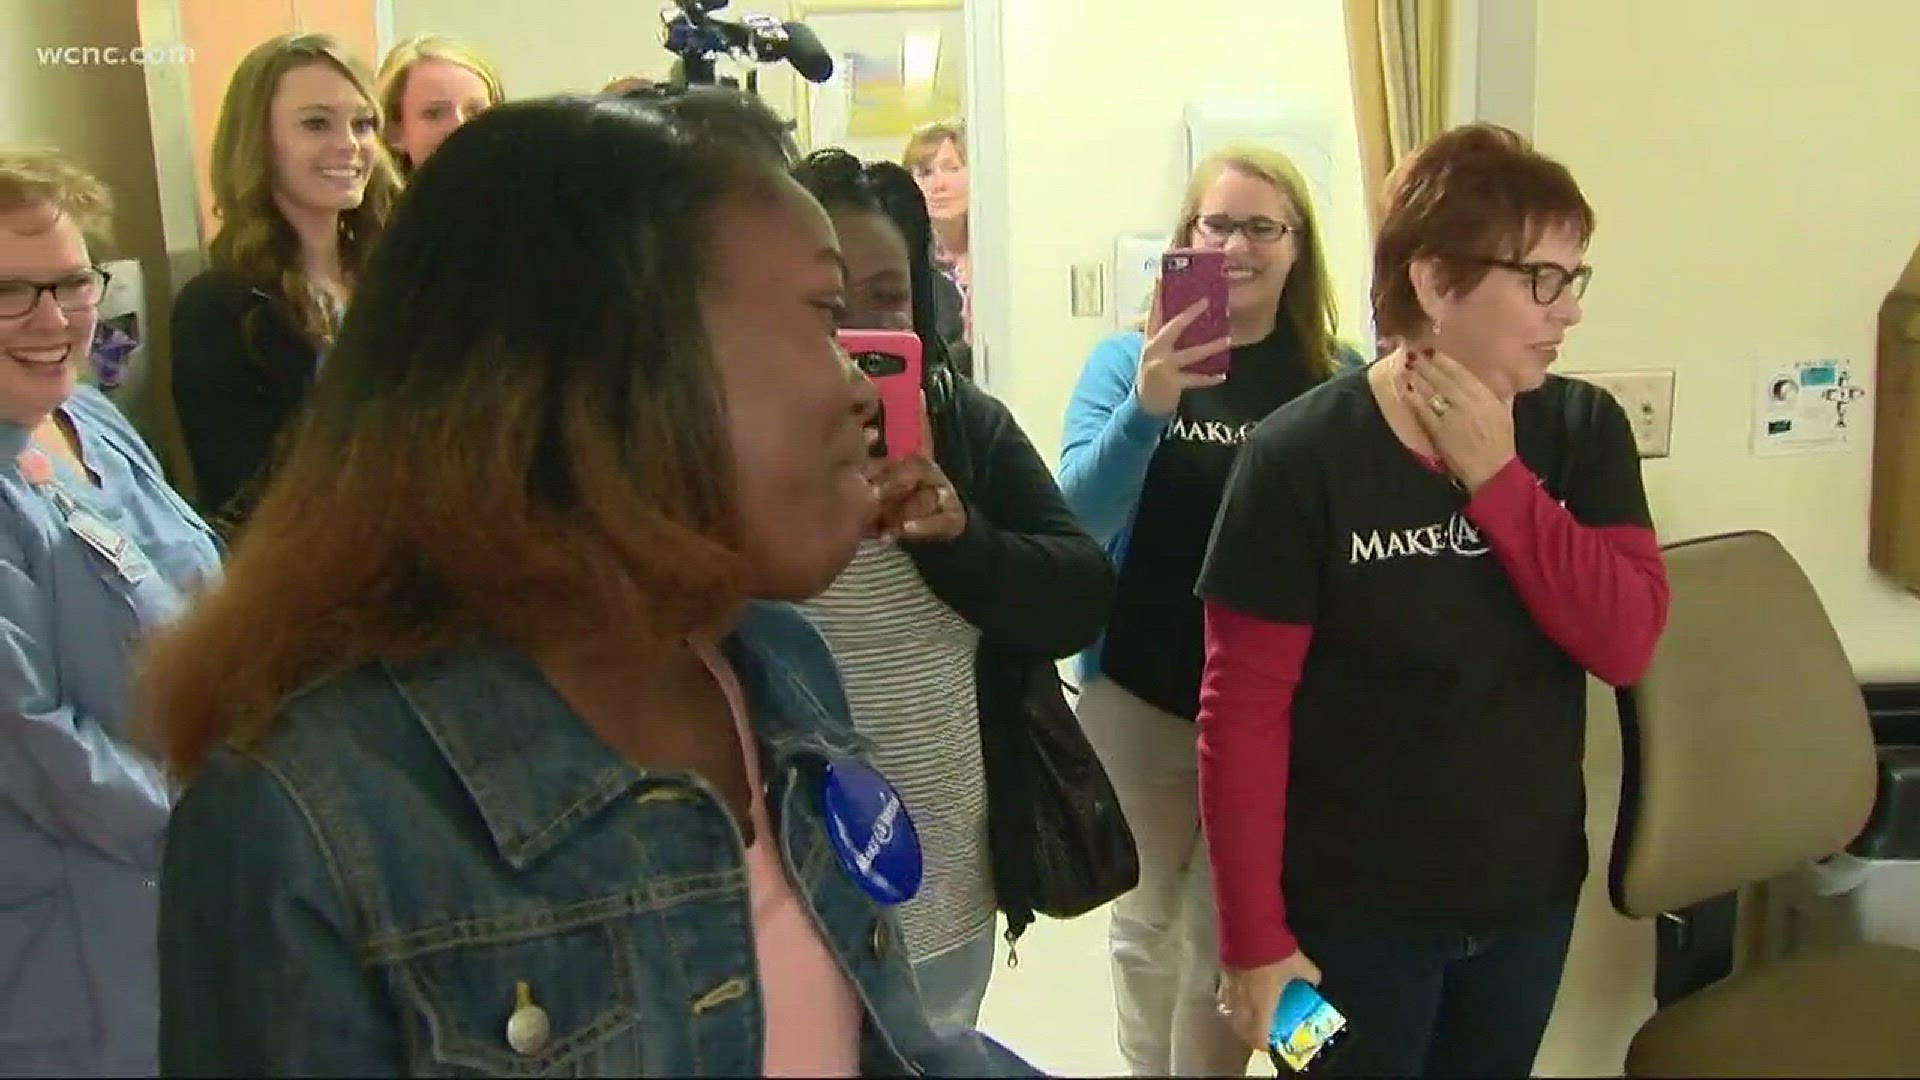 A local girl with a rare blood disorder gets a wish granted